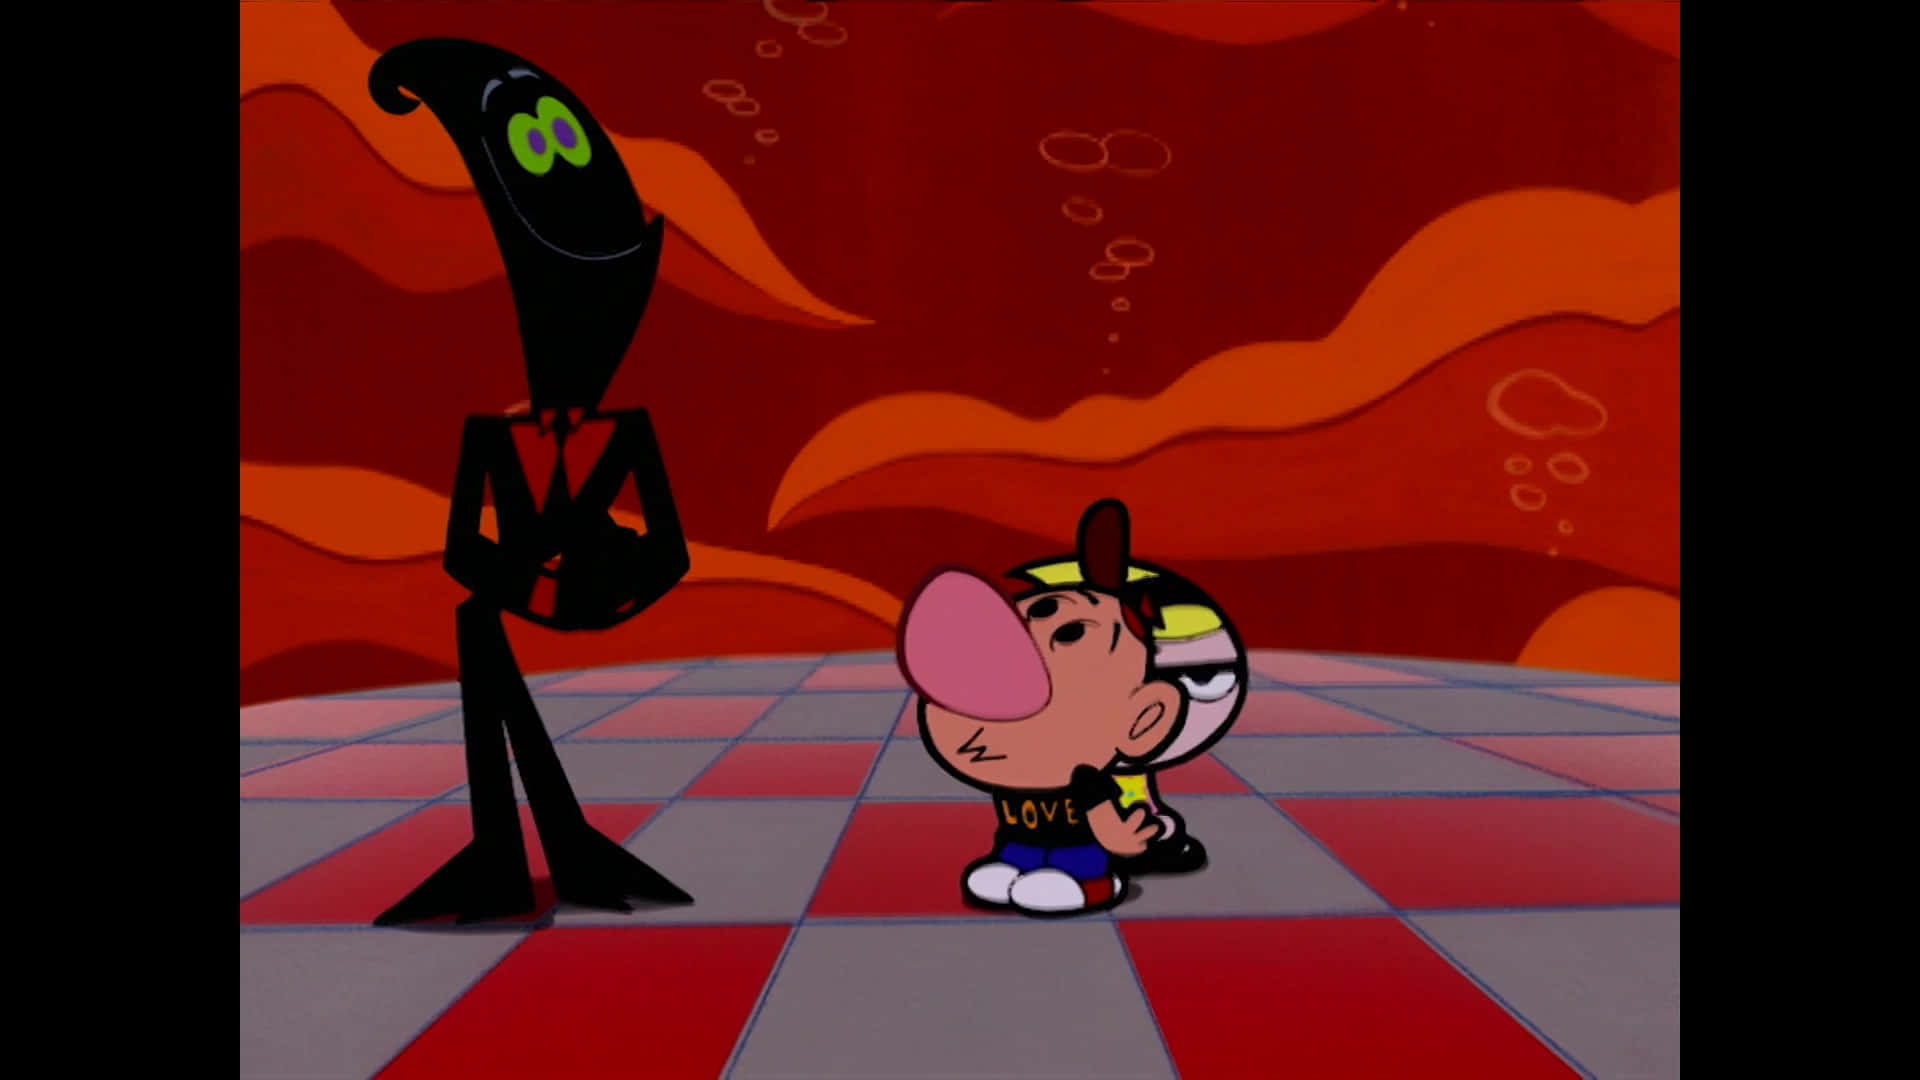 The Grim Adventures of Billy and Mandy Wallpaper Wallpaper